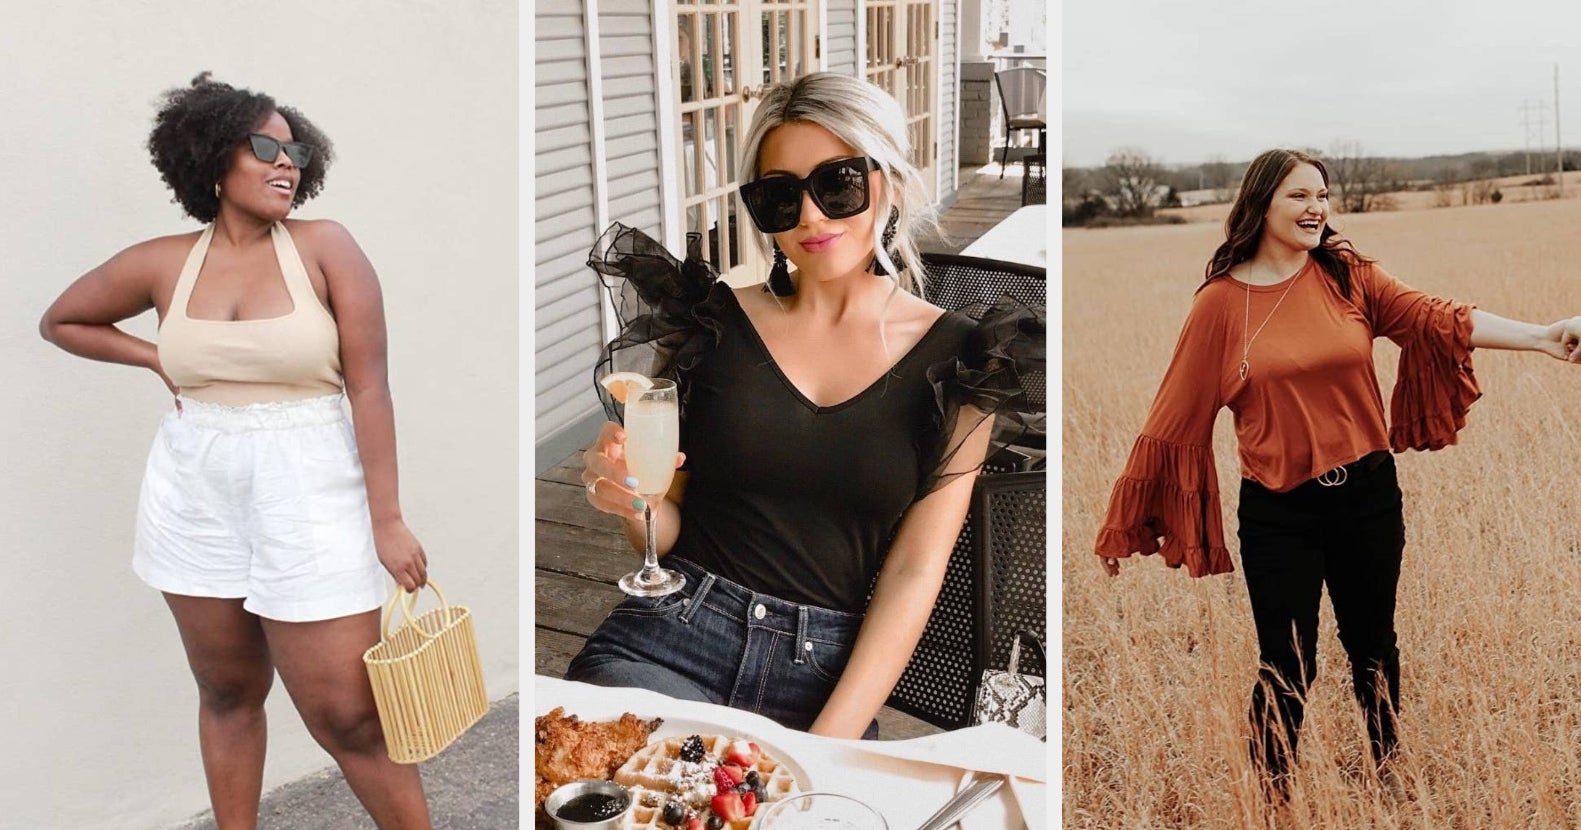 39 Stylish Tops That'll Earn Compliments On Video Calls